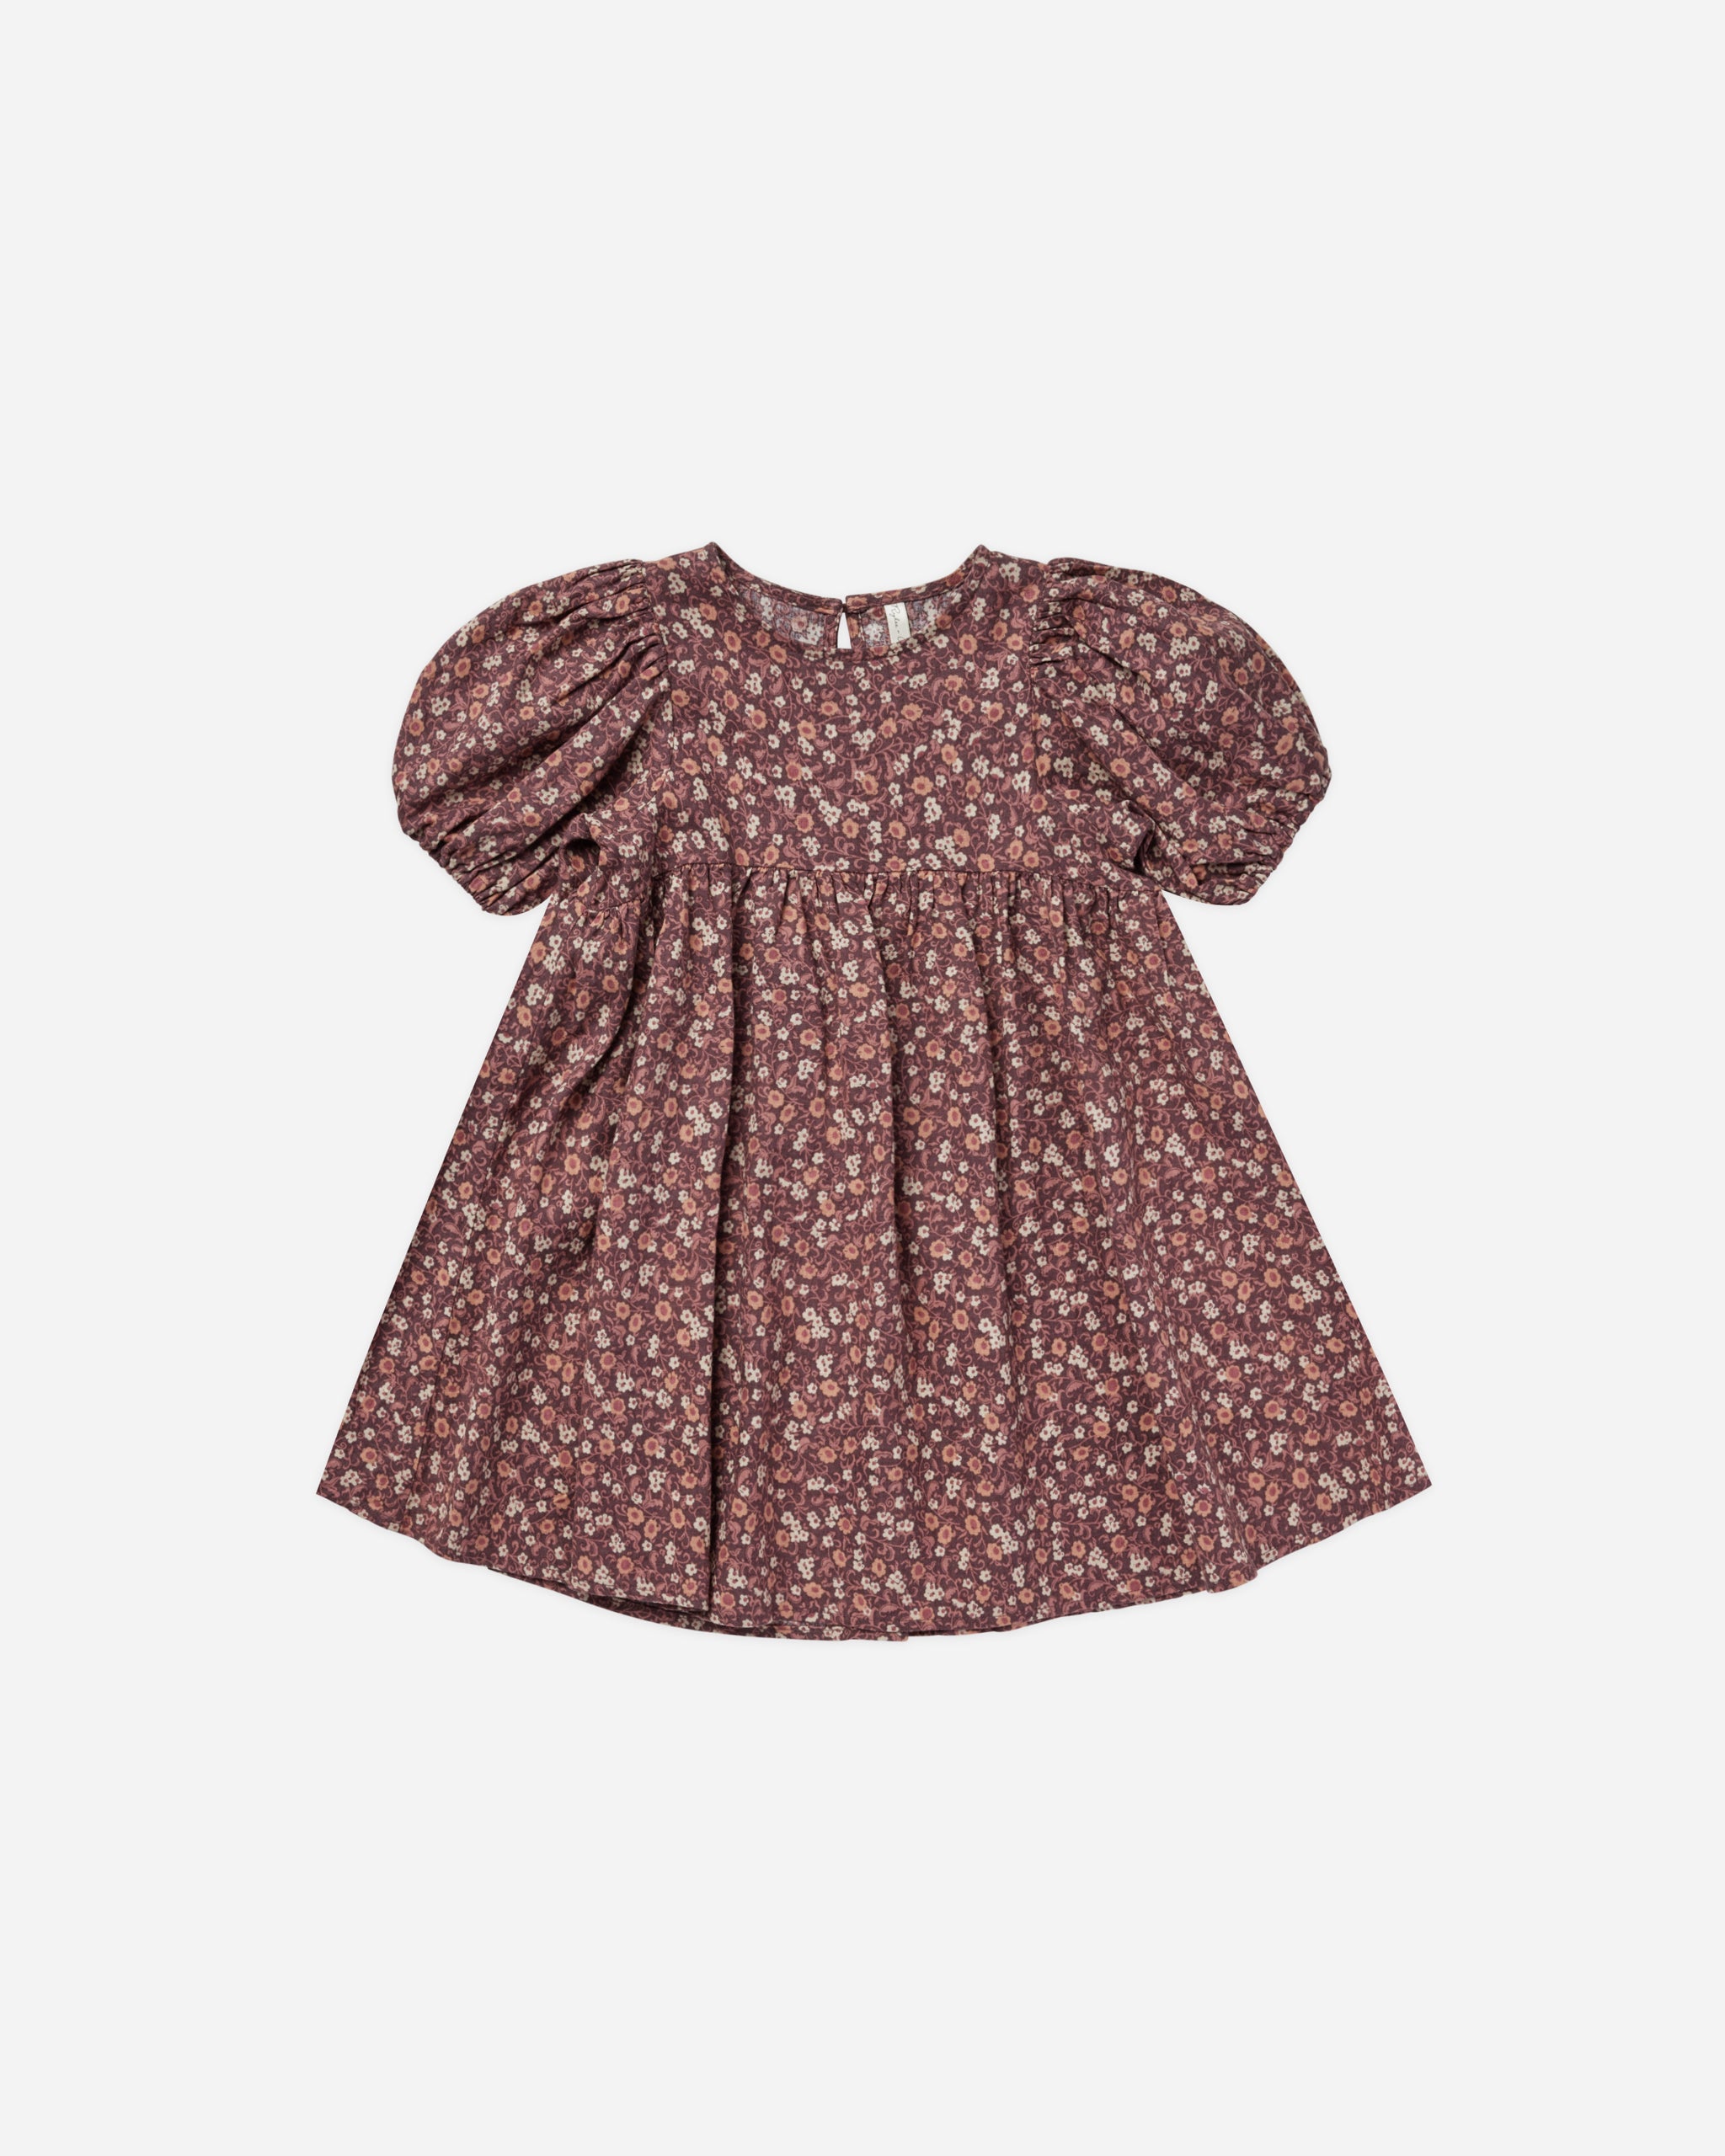 Marley Dress || Plum Floral - Rylee + Cru | Kids Clothes | Trendy Baby Clothes | Modern Infant Outfits |